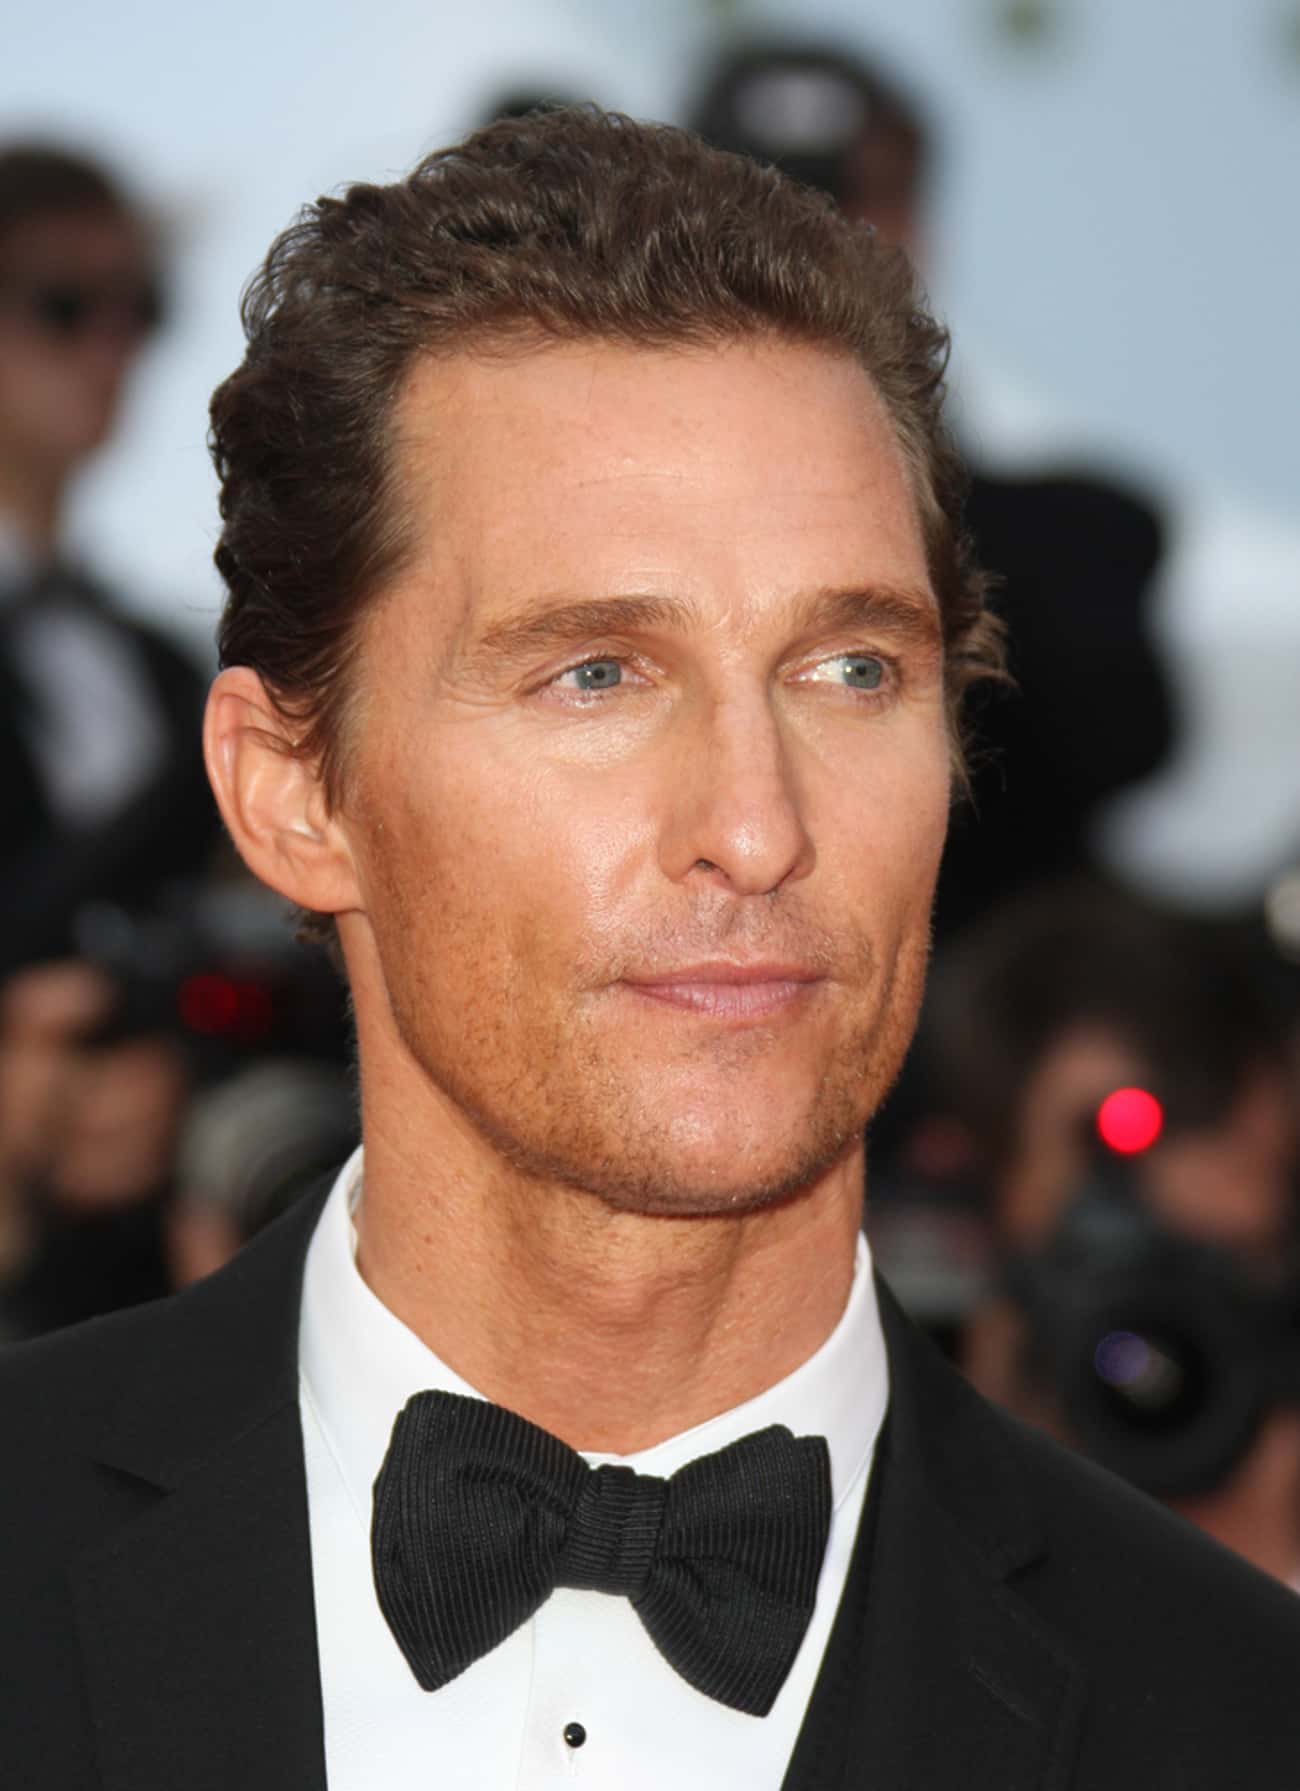 Matthew McConaughey Brings The Best Booze To Parties